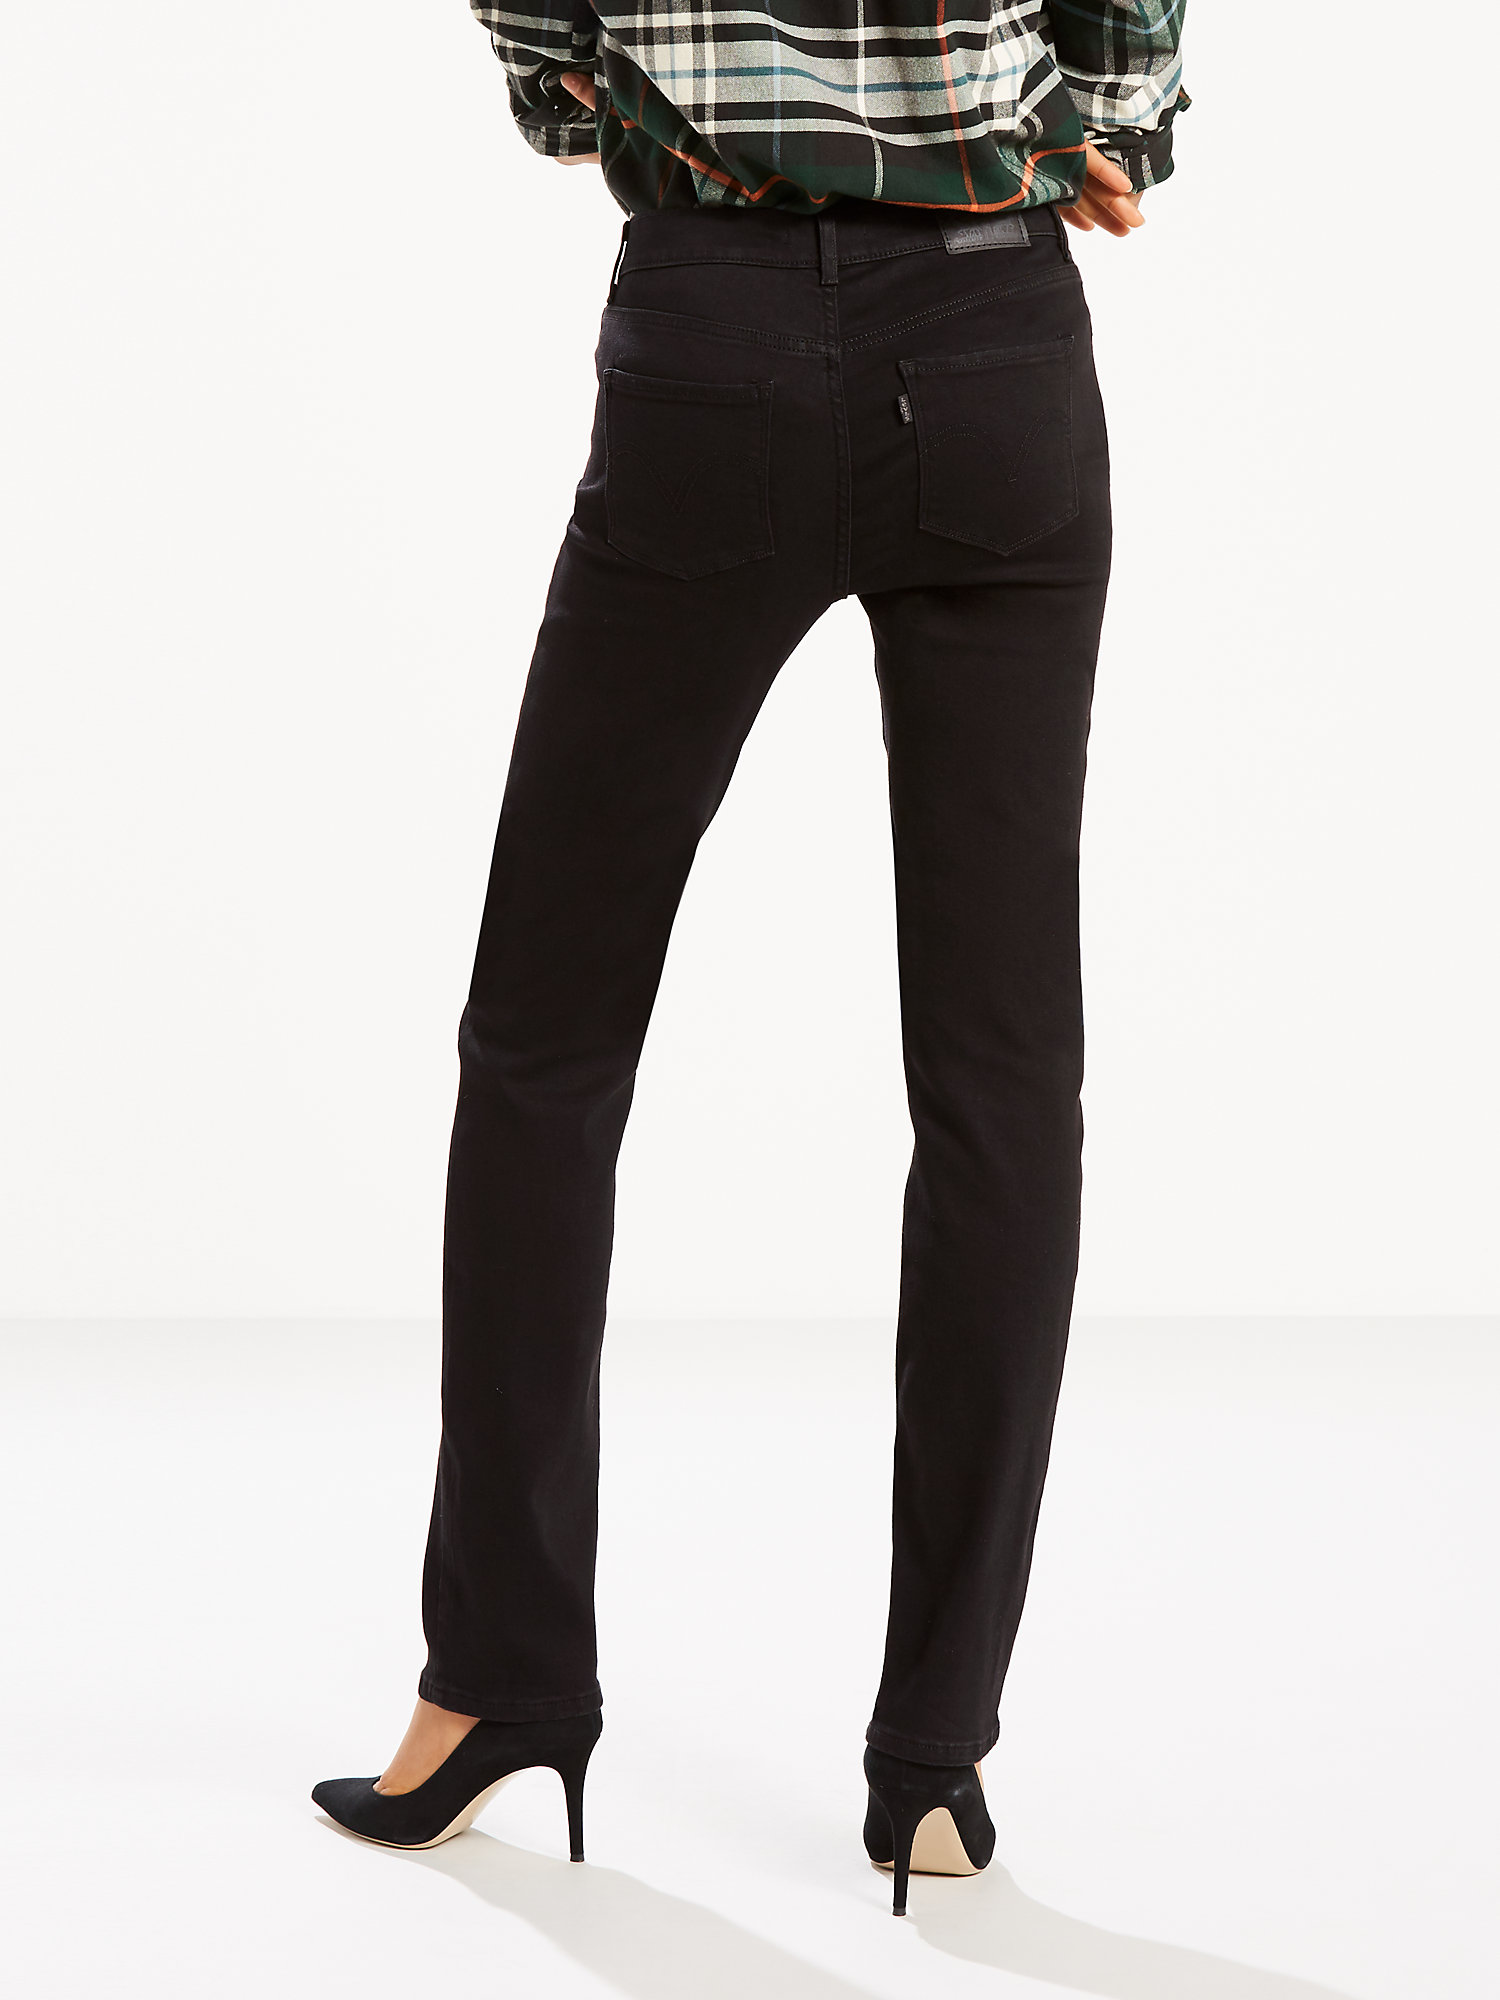 Levi’s Original Red Tab Women's Classic Straight Fit Jeans - image 5 of 7